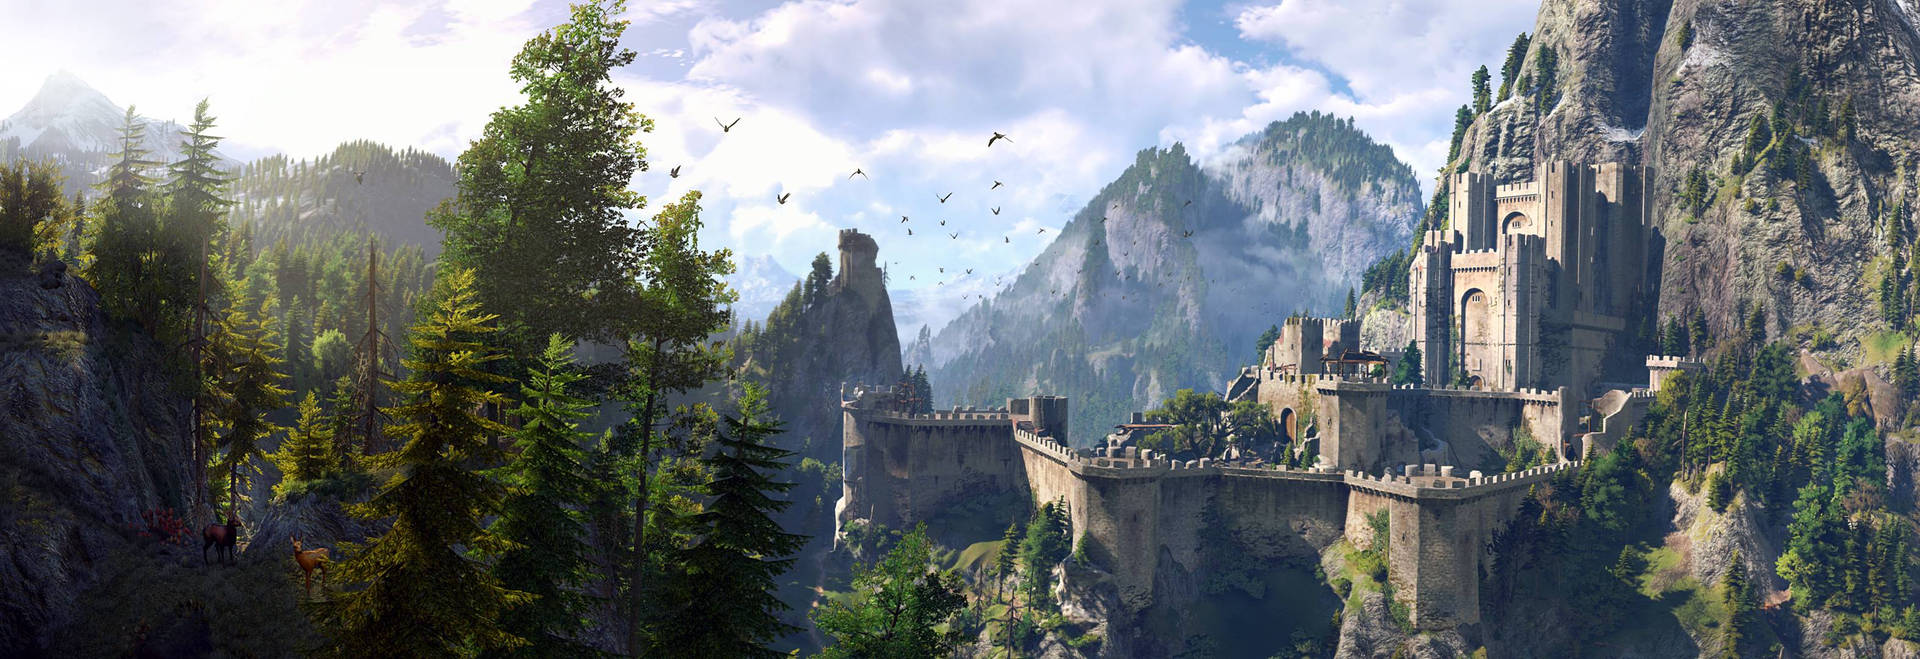 Kaer Morhen The Witcher 3 Background